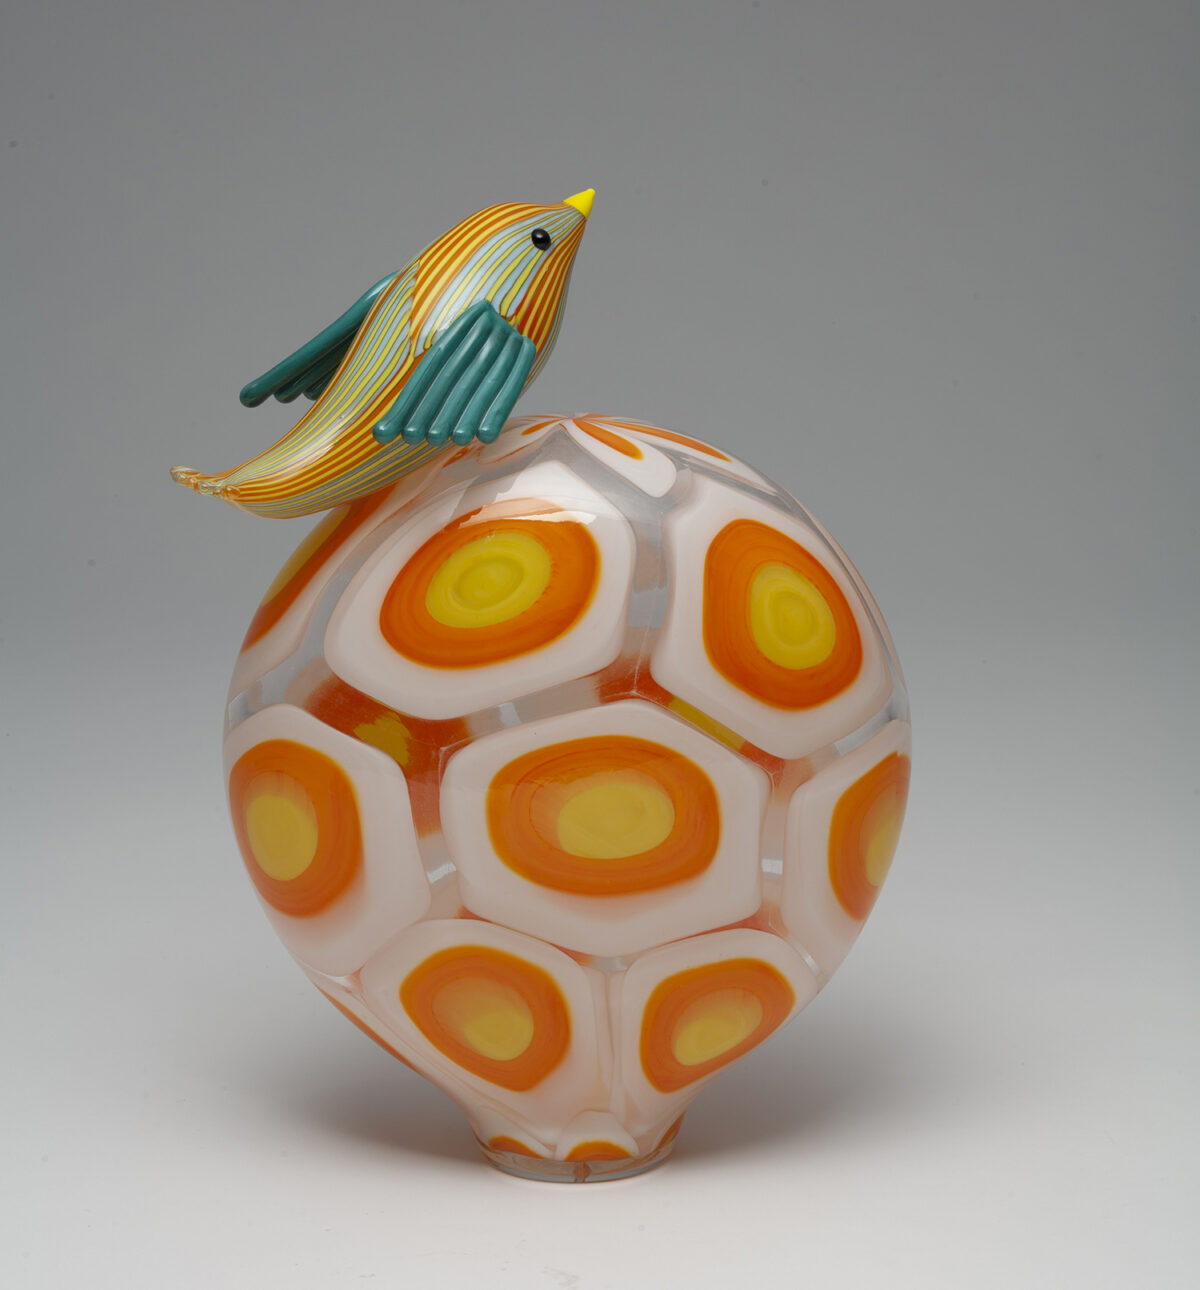 Luminosity Gorgeous Animal Glass Sculptures With Vibrant Colors By Claire Kelly